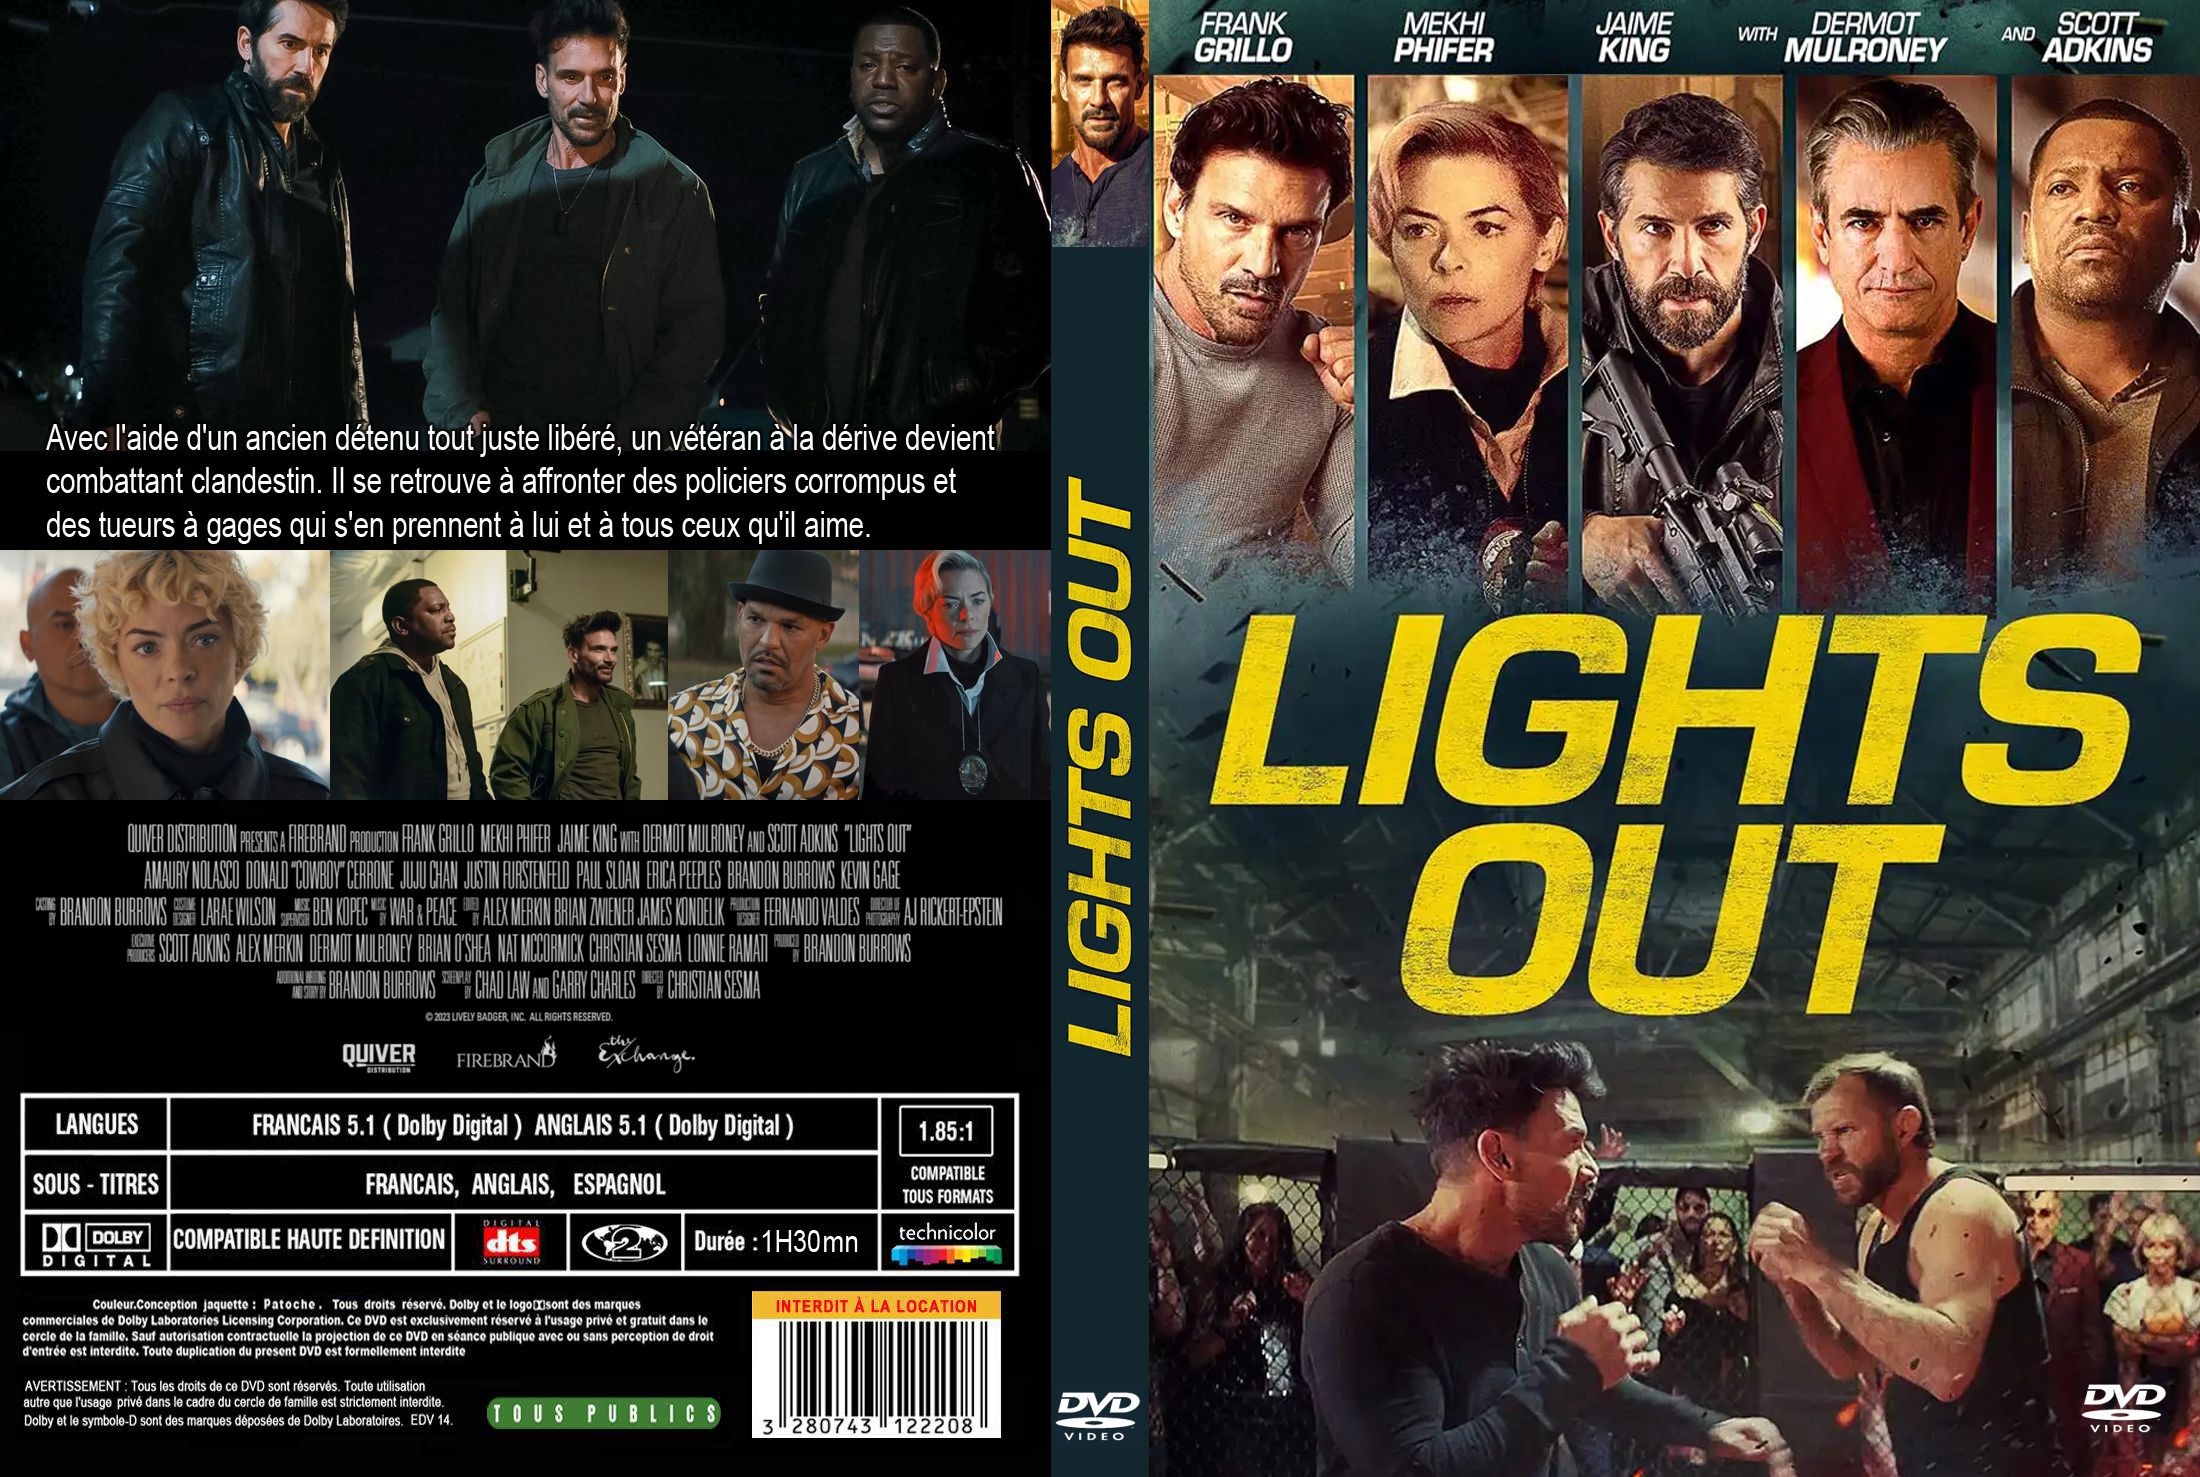 Jaquette DVD Lights out custom